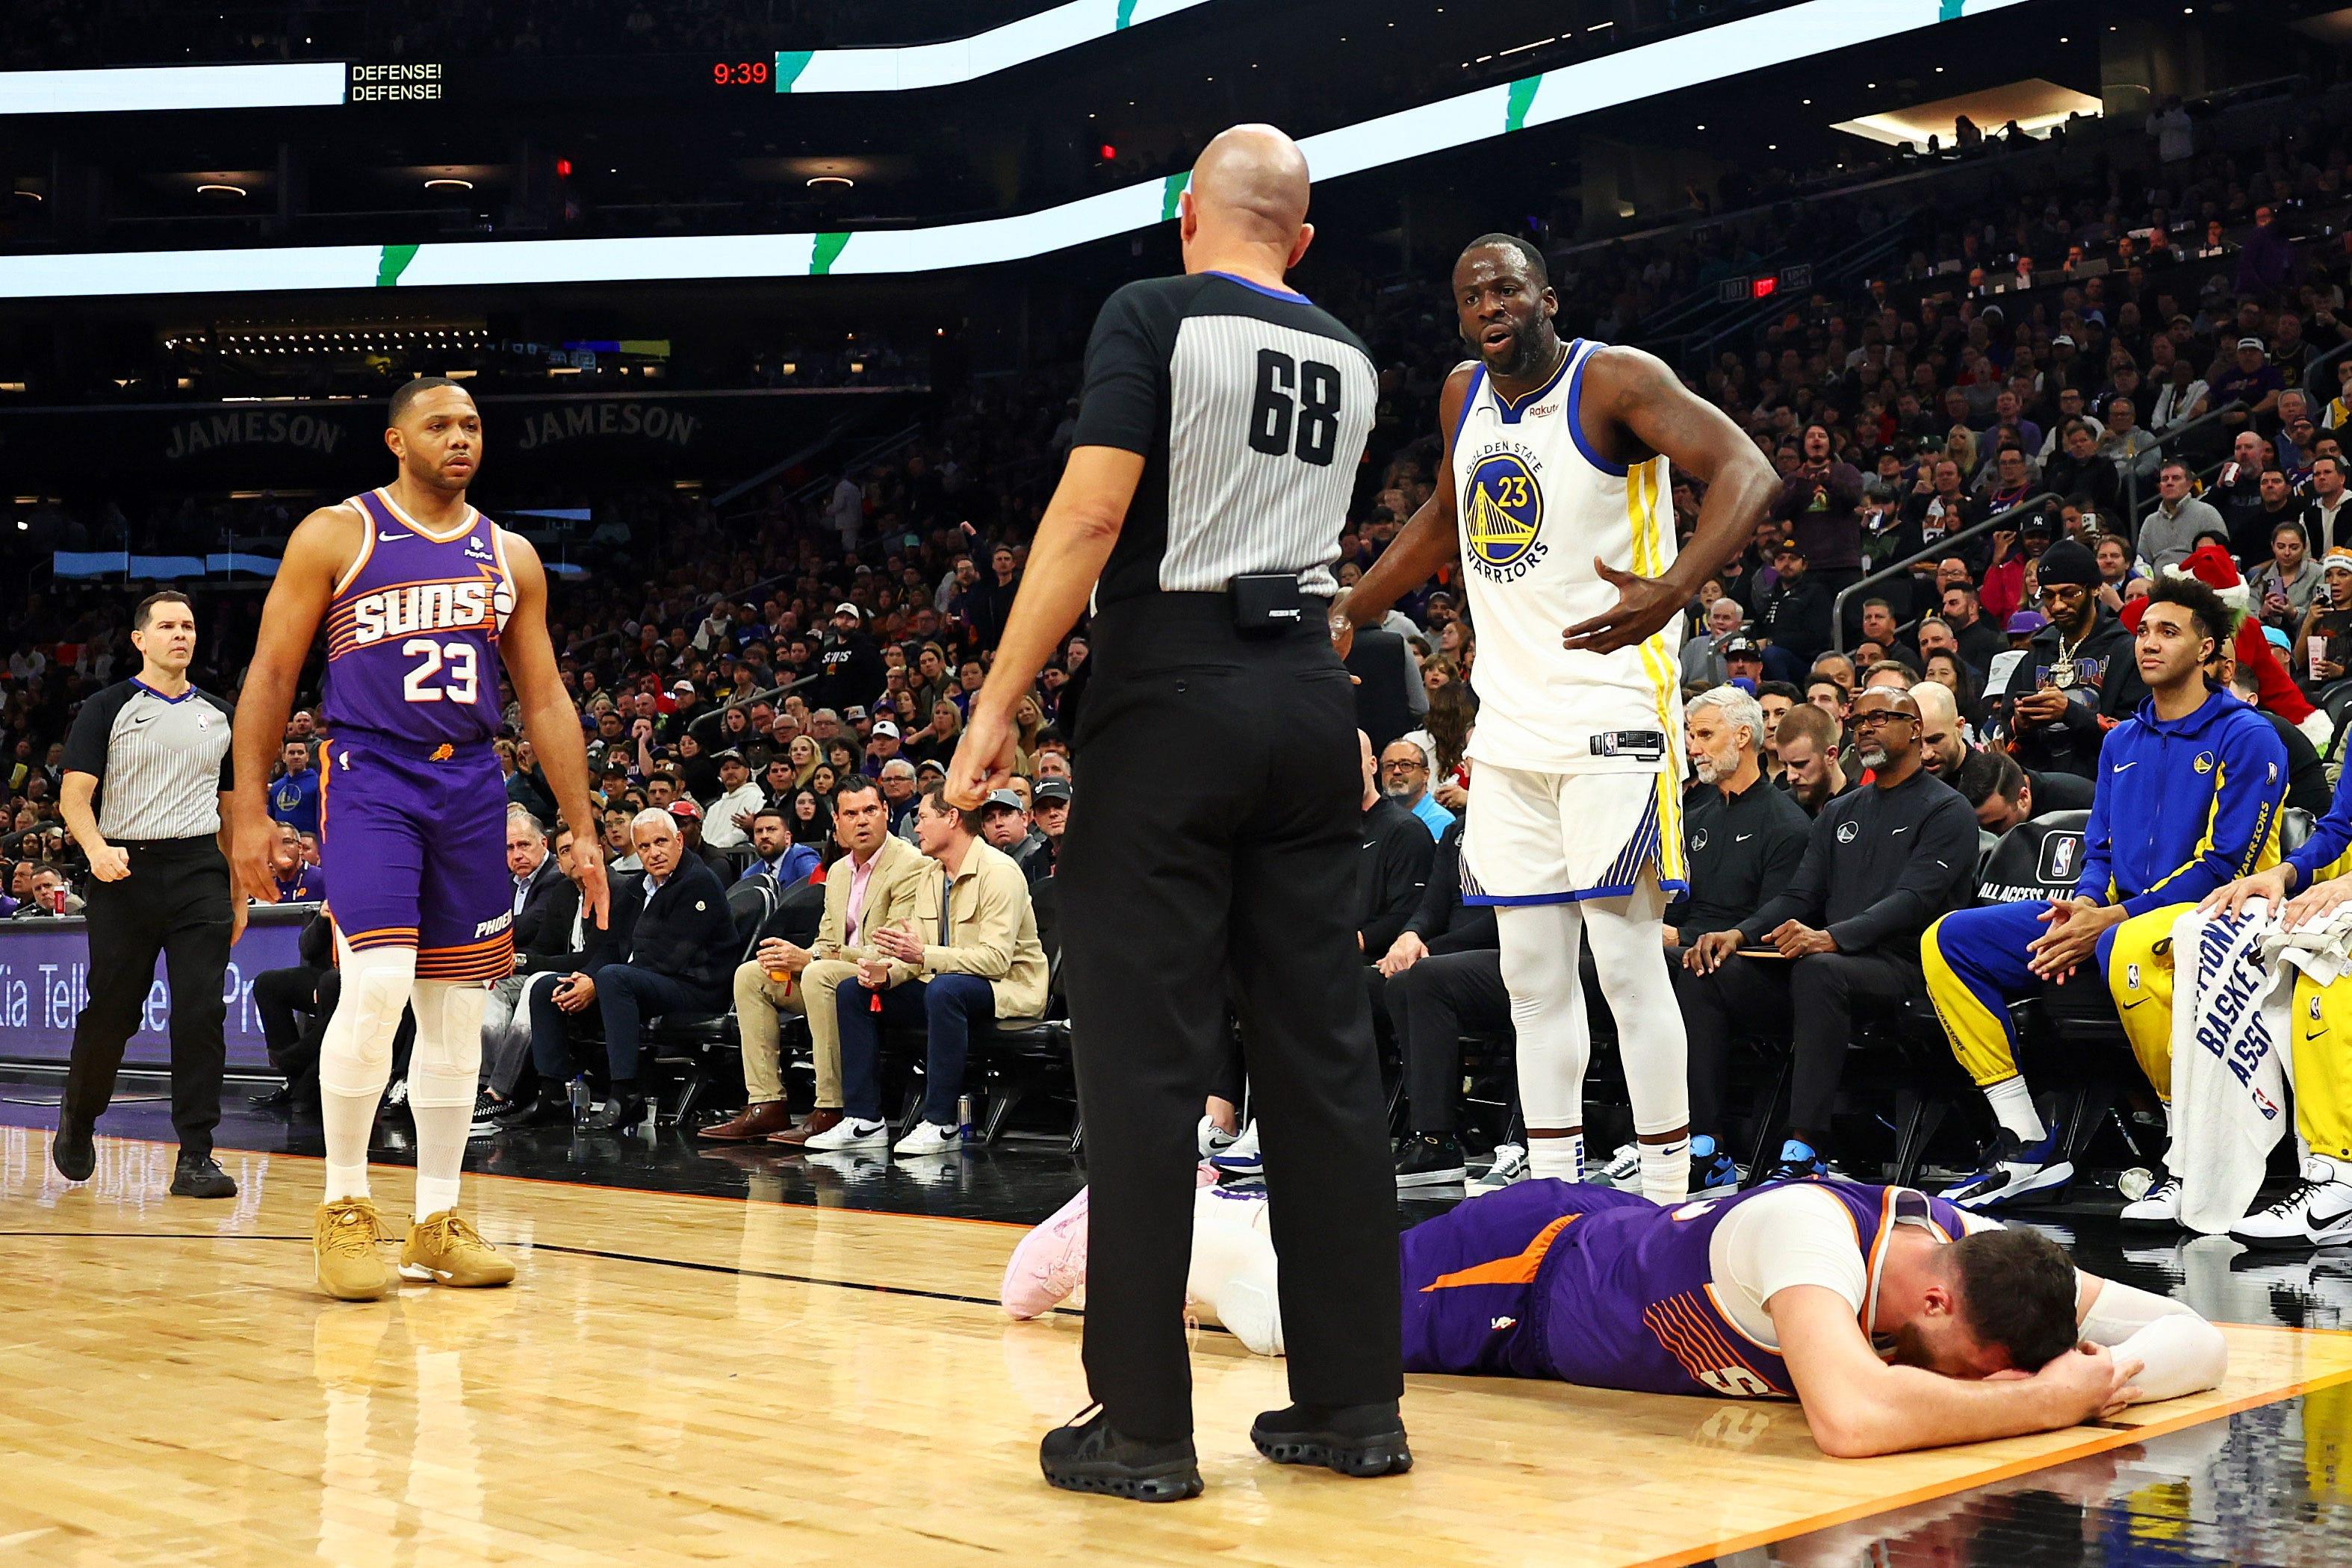 Draymond Green was suspended indefinitely for striking the Suns